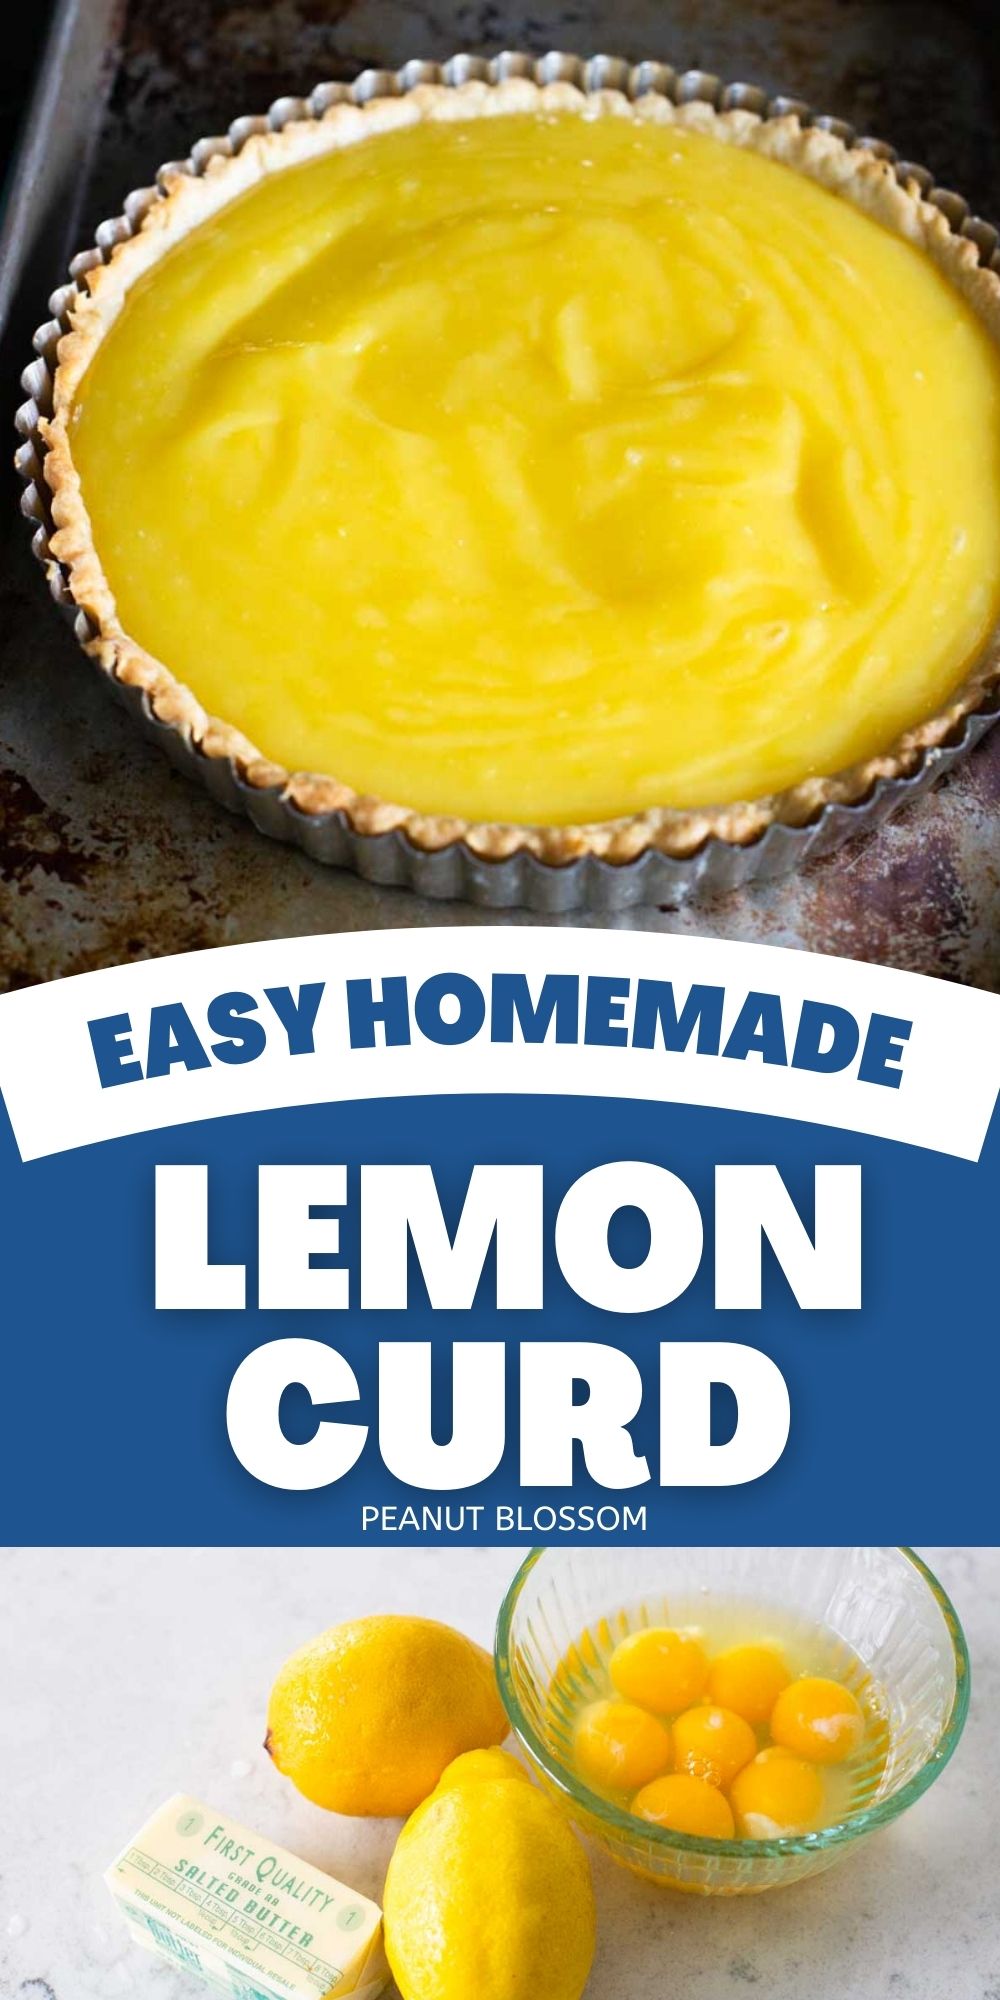 A tart filled with lemon curd is next to a photo of the lemons and eggs used to make it.